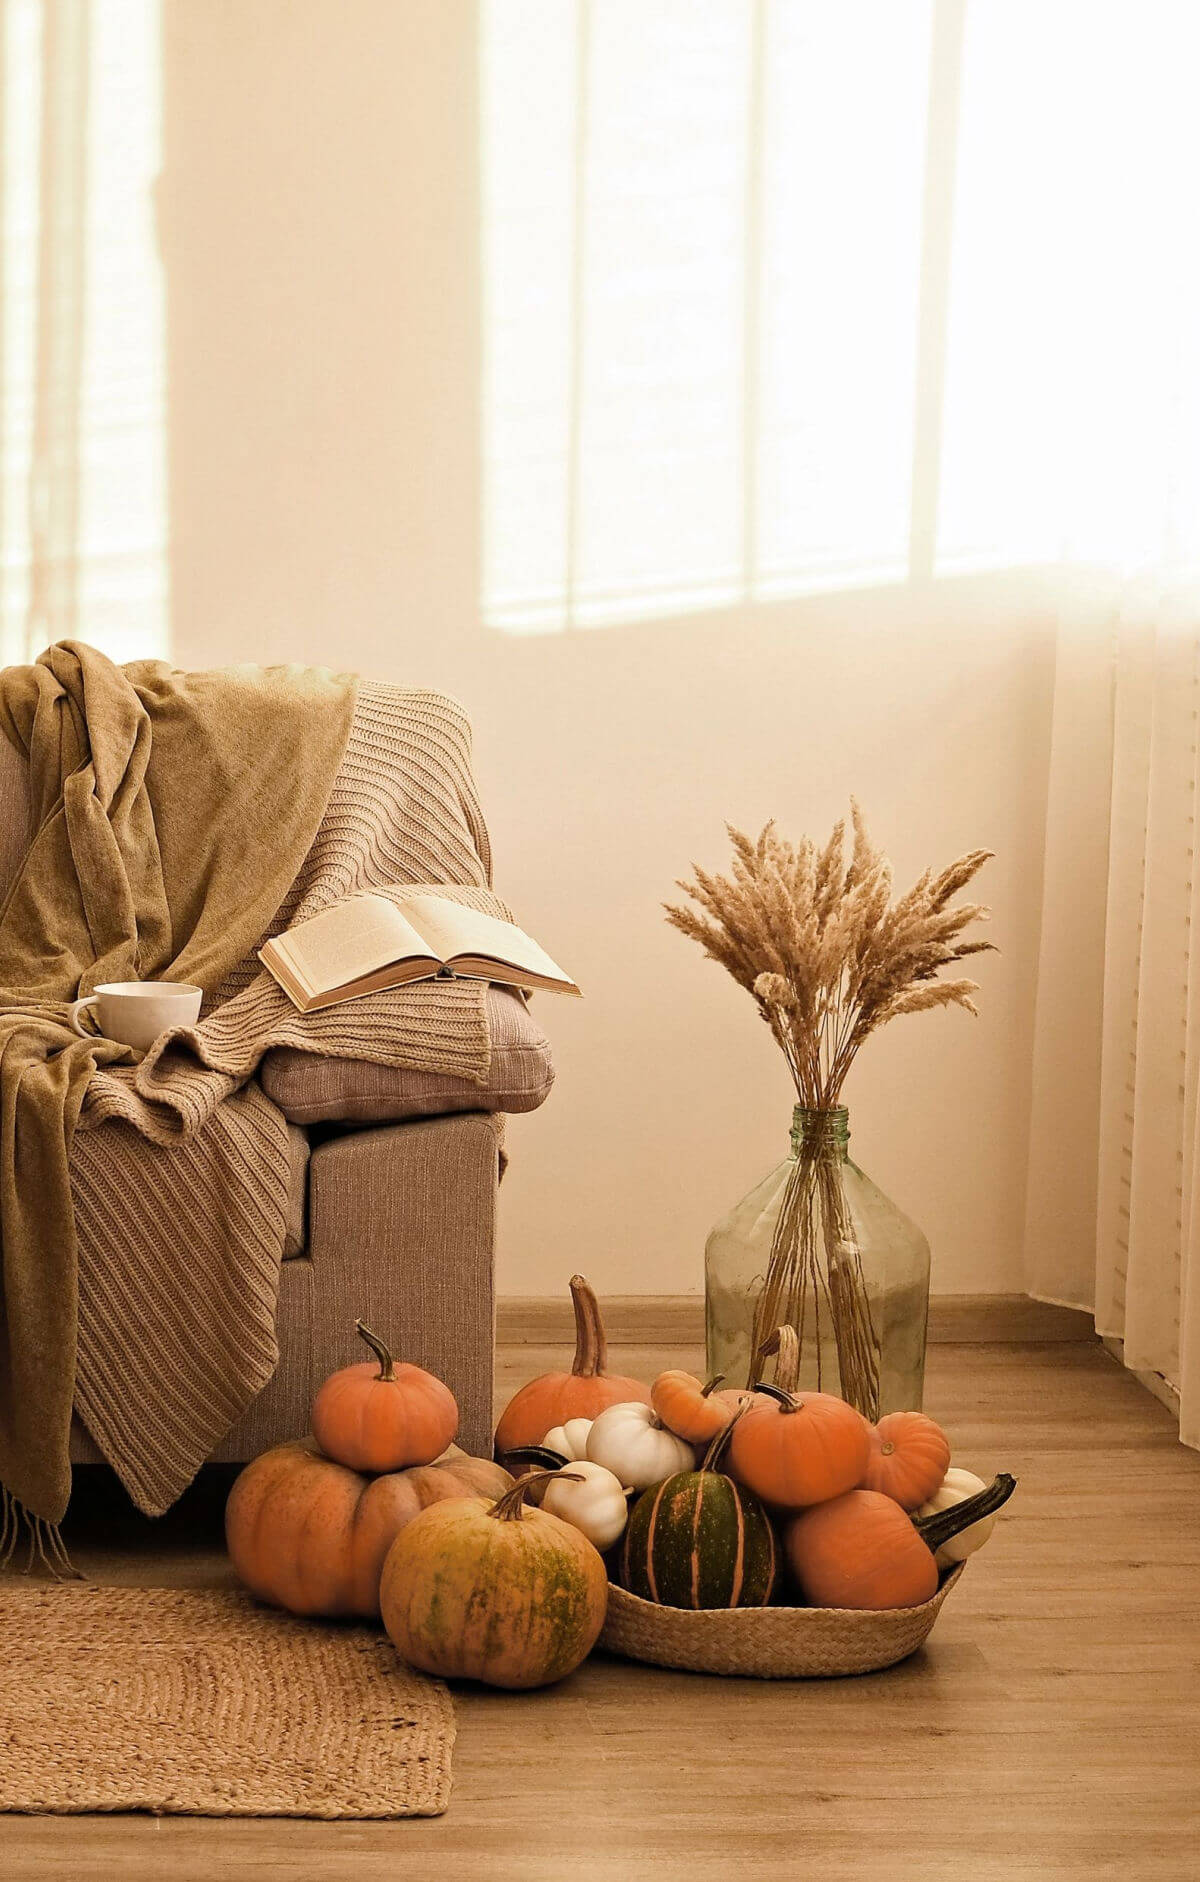 A serene living room space with a brown sofa, brown blankets, natural basket filled with pumpkins, and dried wheat in a glass vase on the floor. 